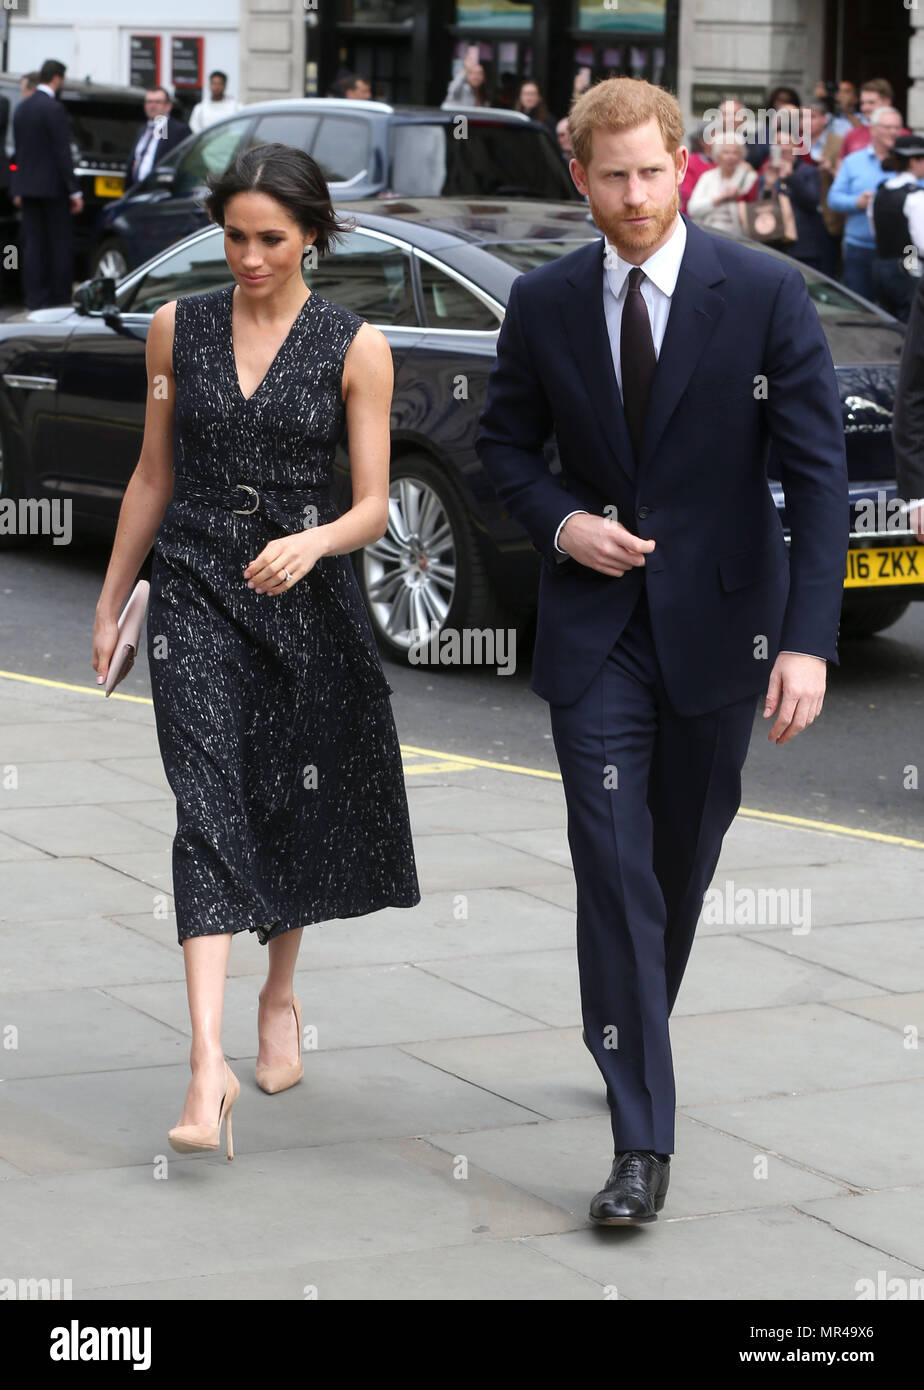 attends Stephen Lawrence memorial service St Martin-in-the-Fields Church, Trafalgar Square, London.  Featuring: Meghan Markle and Prince Harry Where: London, United Kingdom When: 23 Apr 2018 Credit: Danny Martindale/WENN Stock Photo